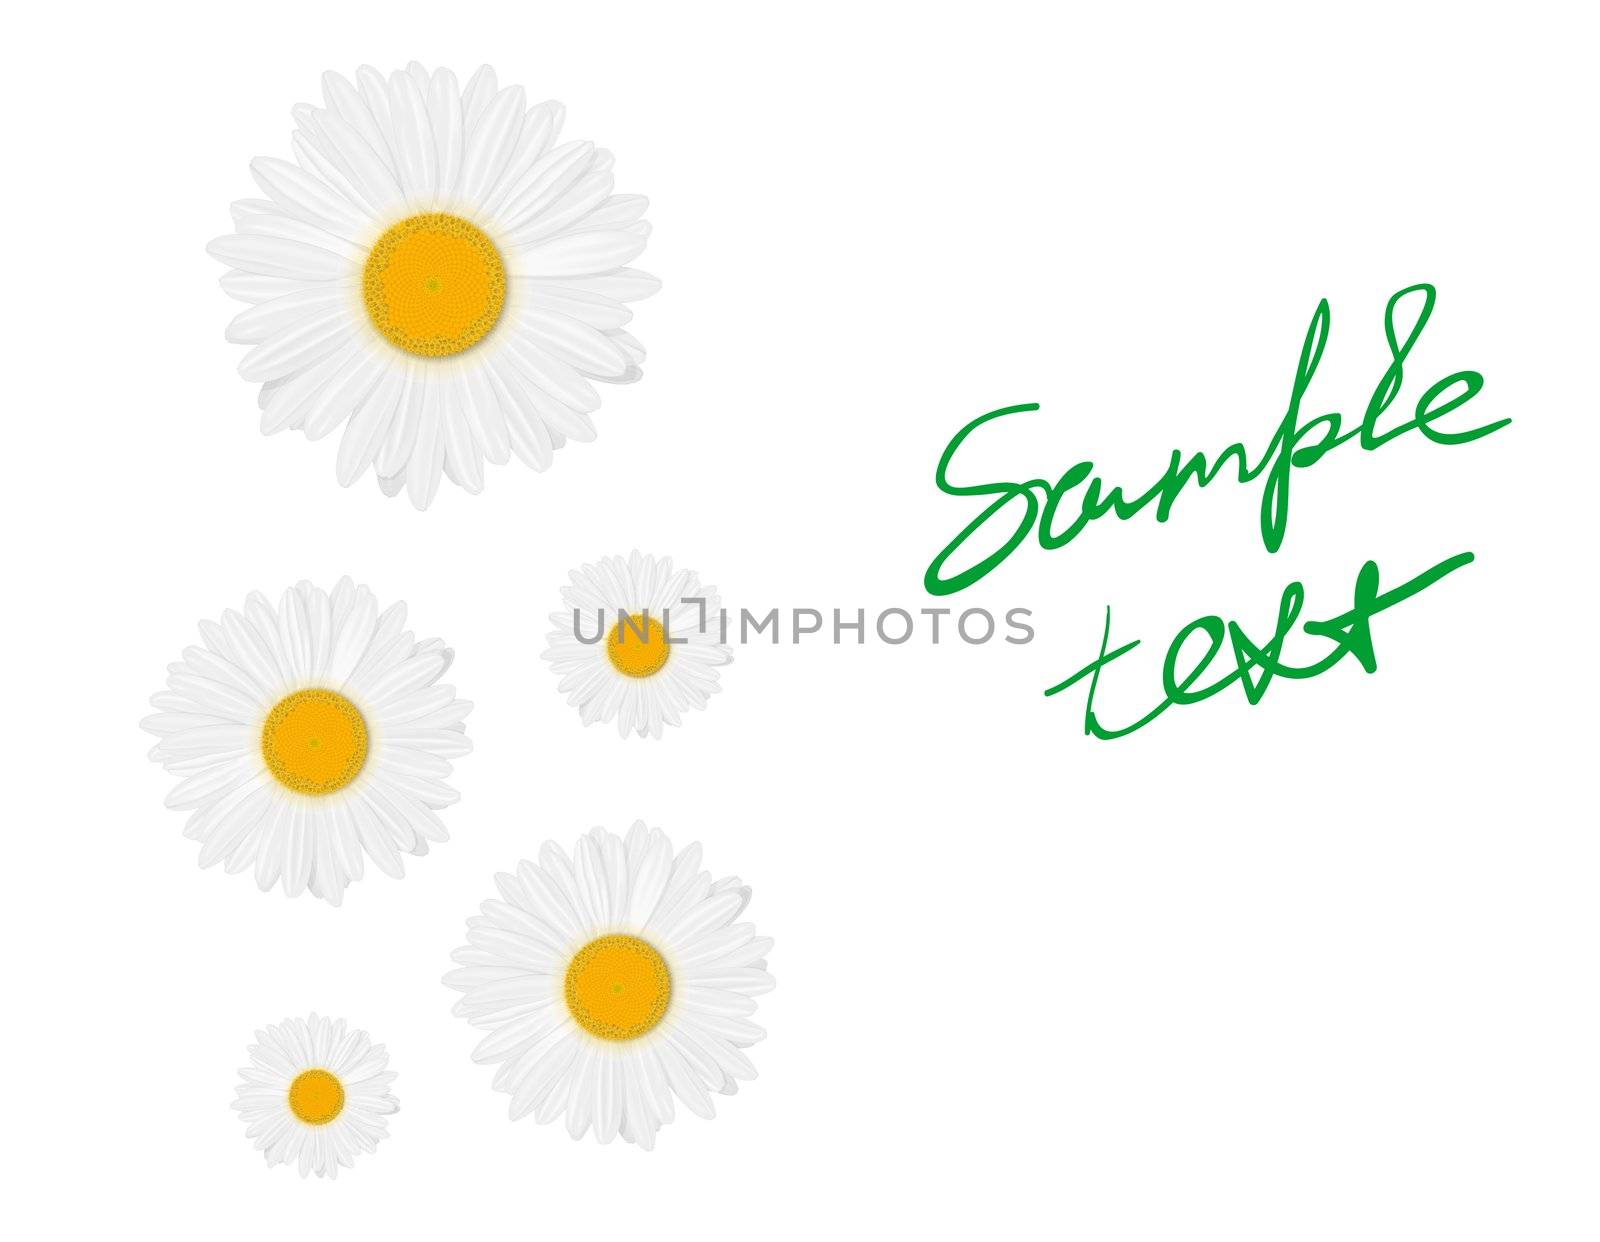 Isolated realistic daisy (chamomile) flower on a white background. Vector illustration